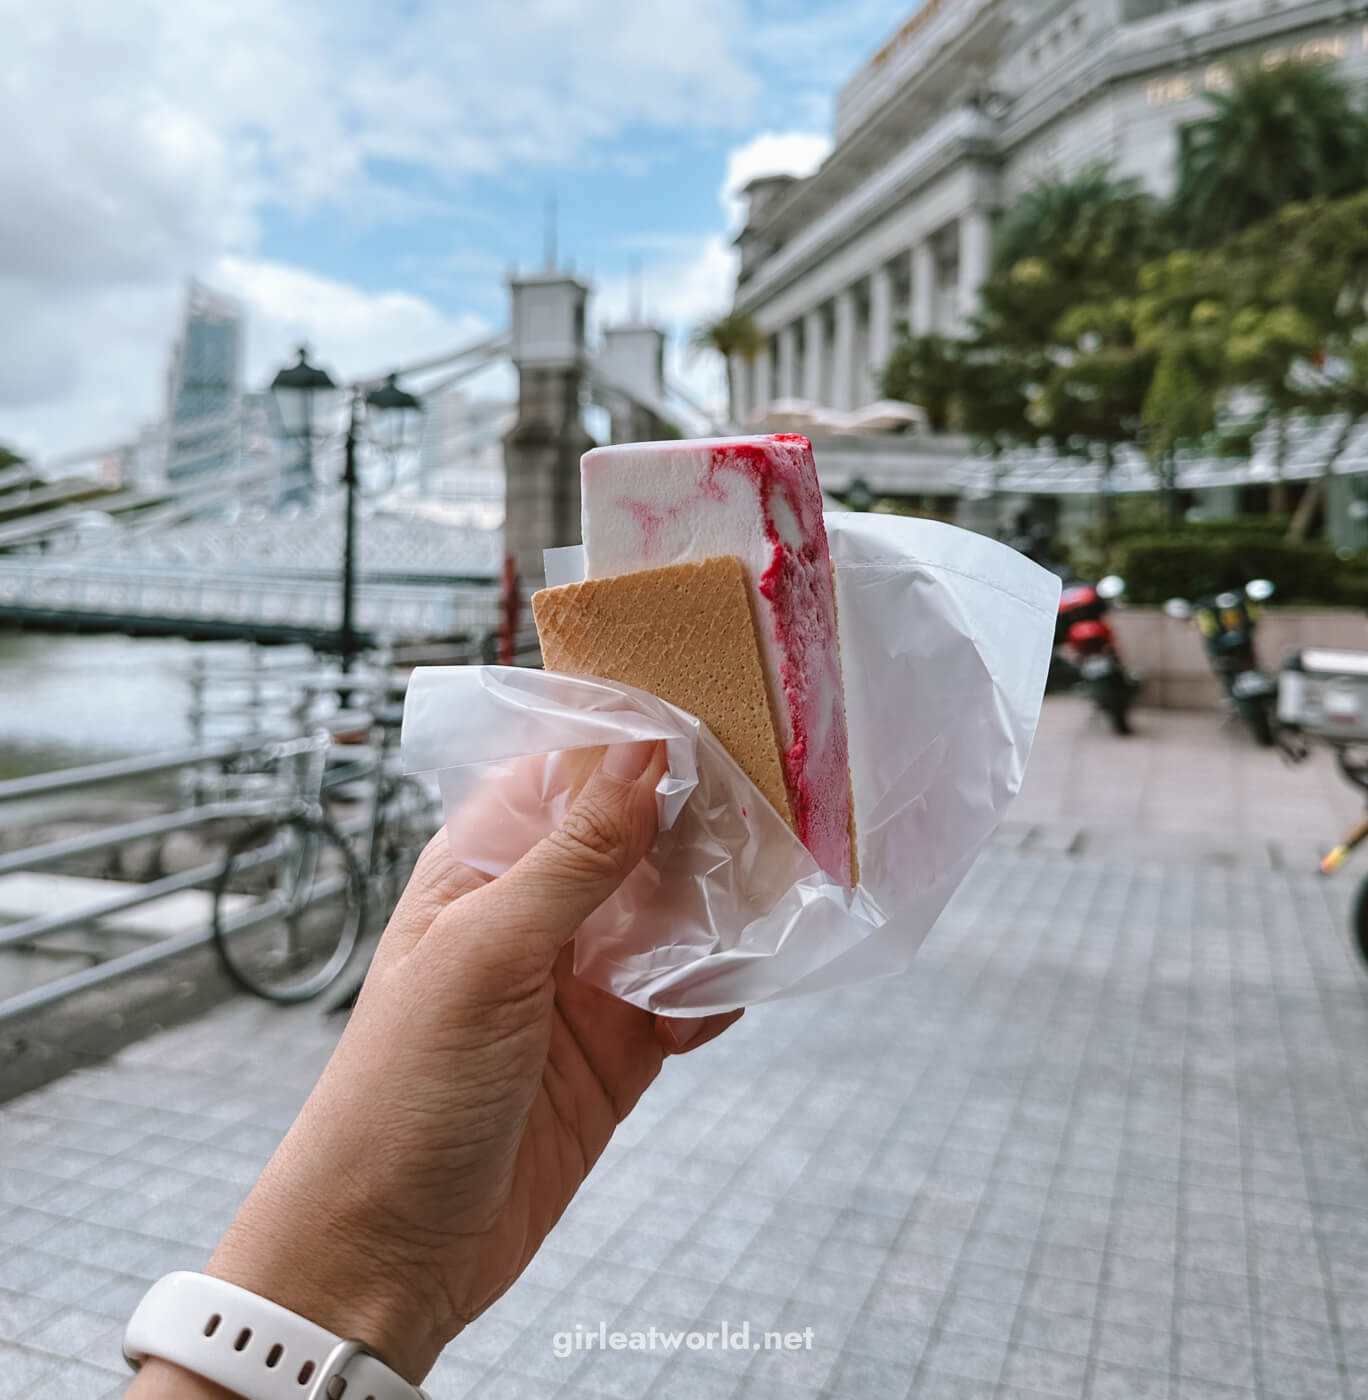 Singapore Food - Ice Cream Sandwich with wafer